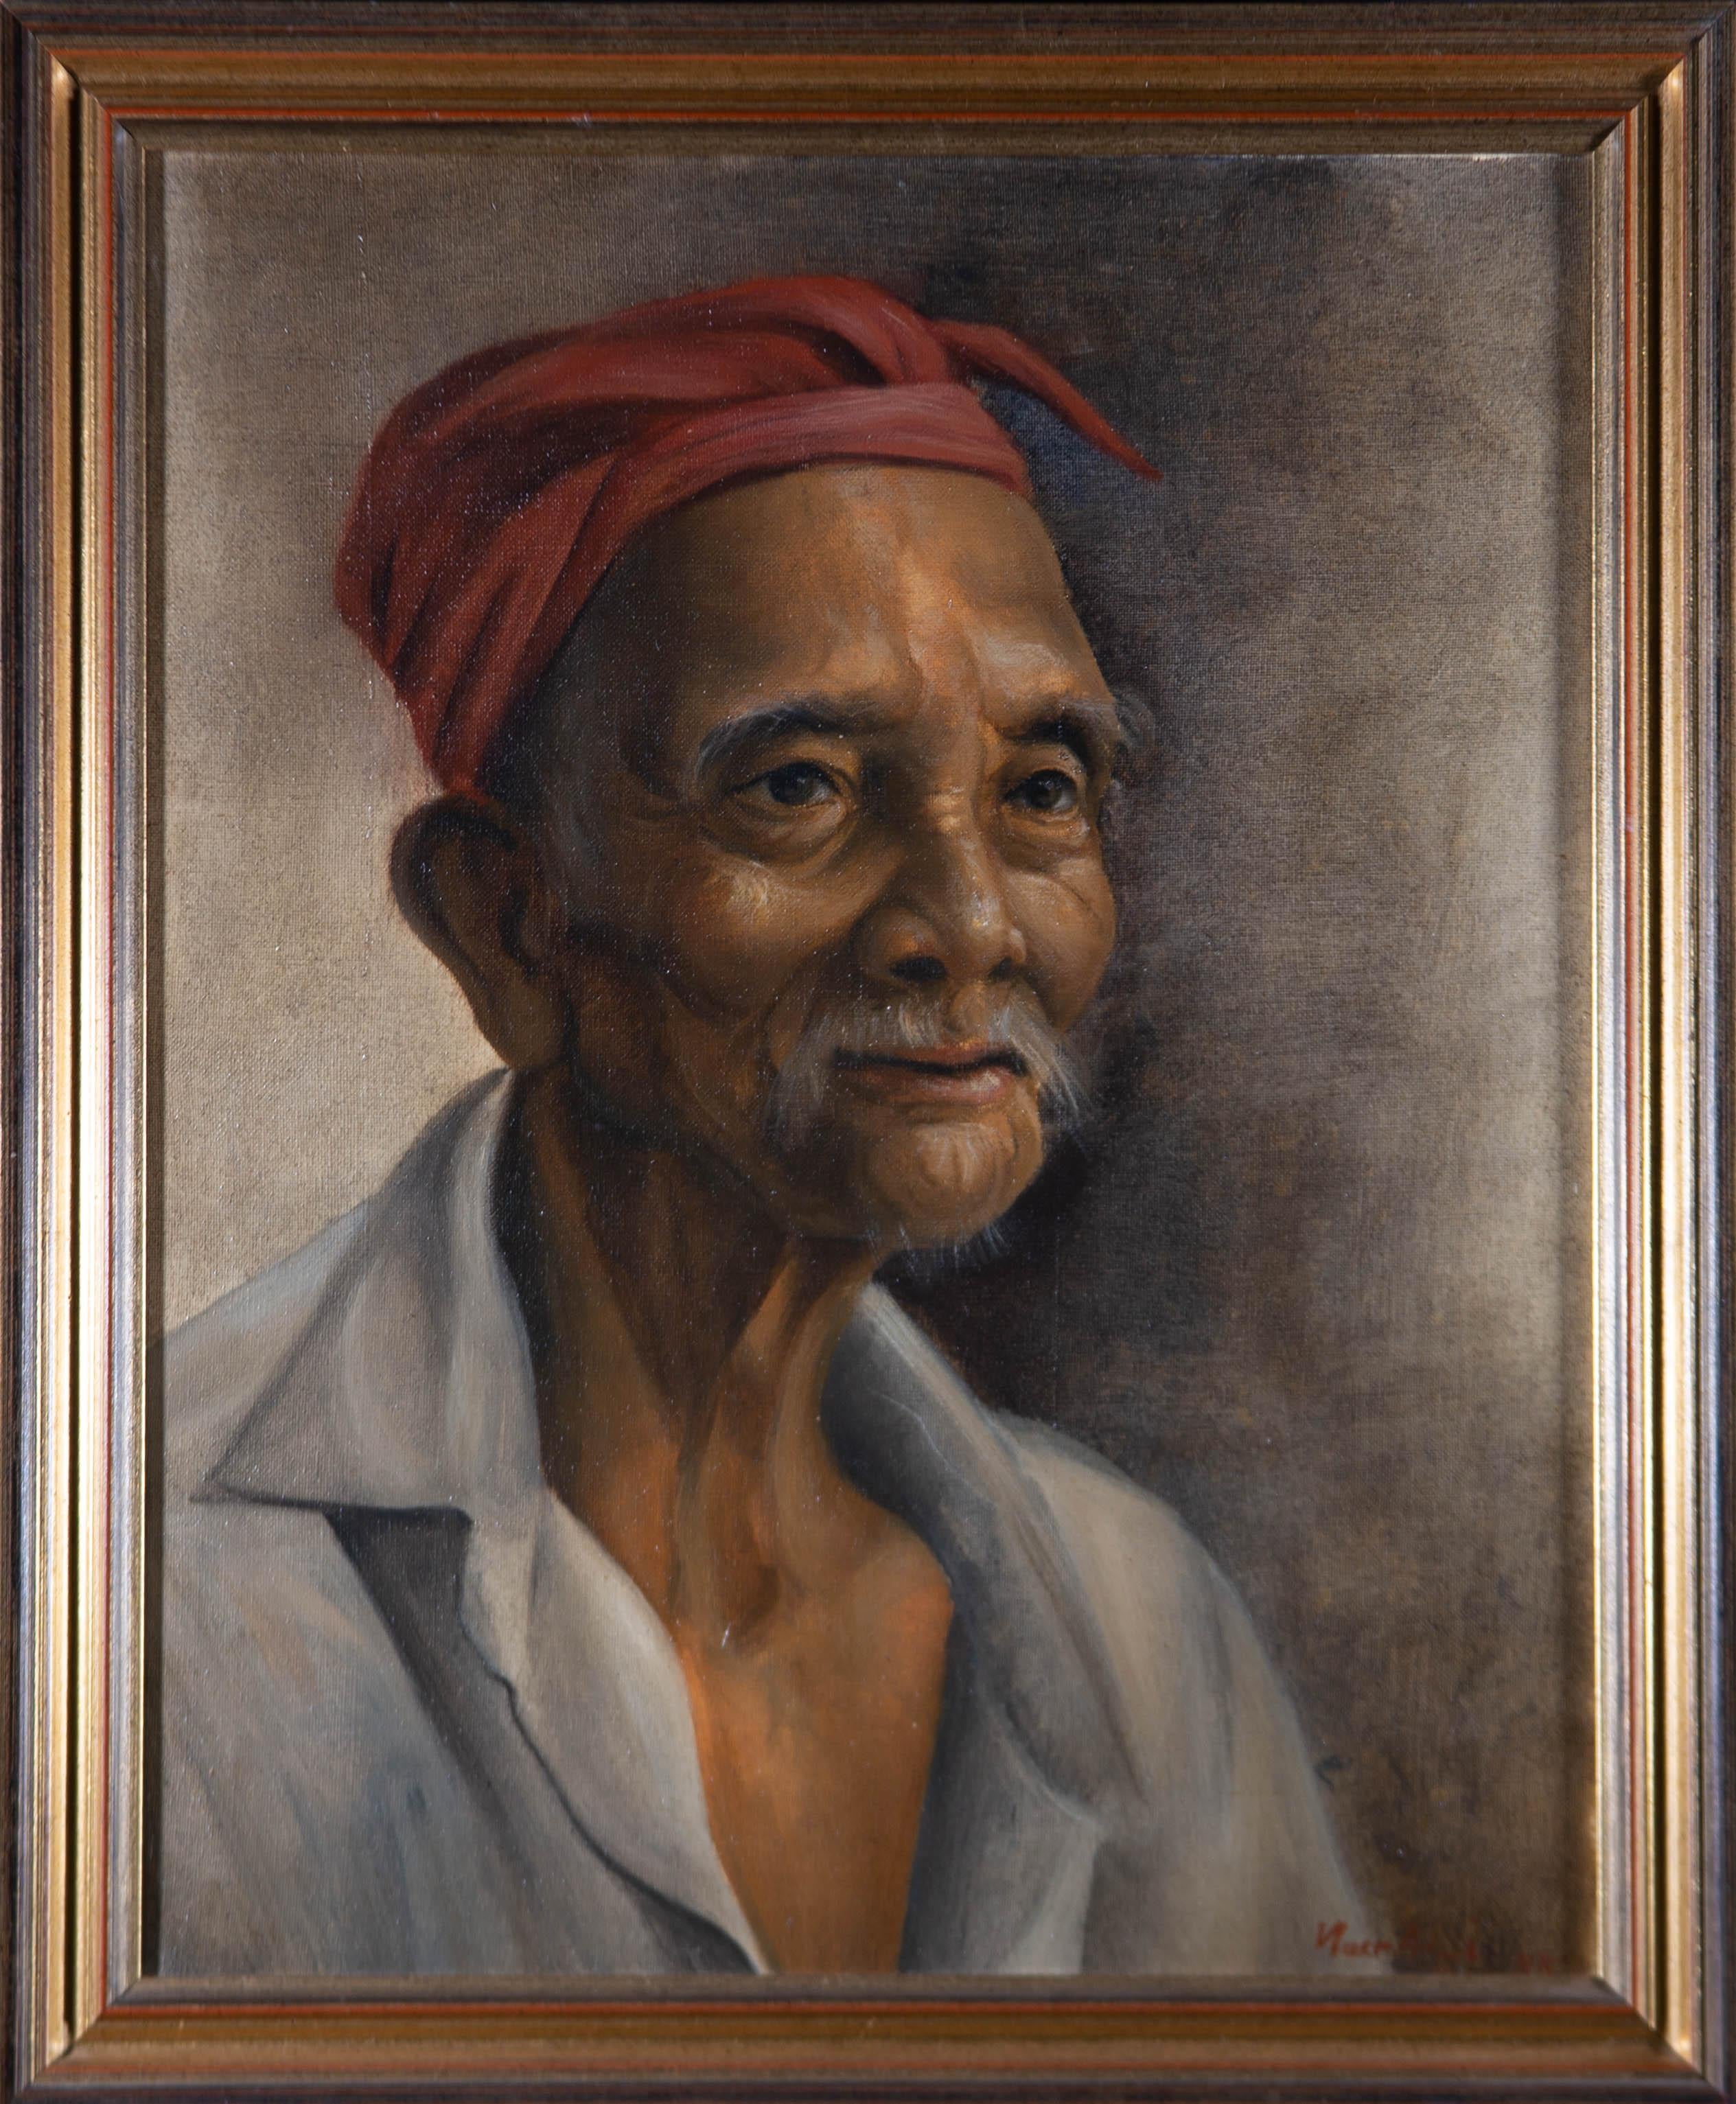 Unknown Portrait Painting - 1985 Oil - Old Village Chief